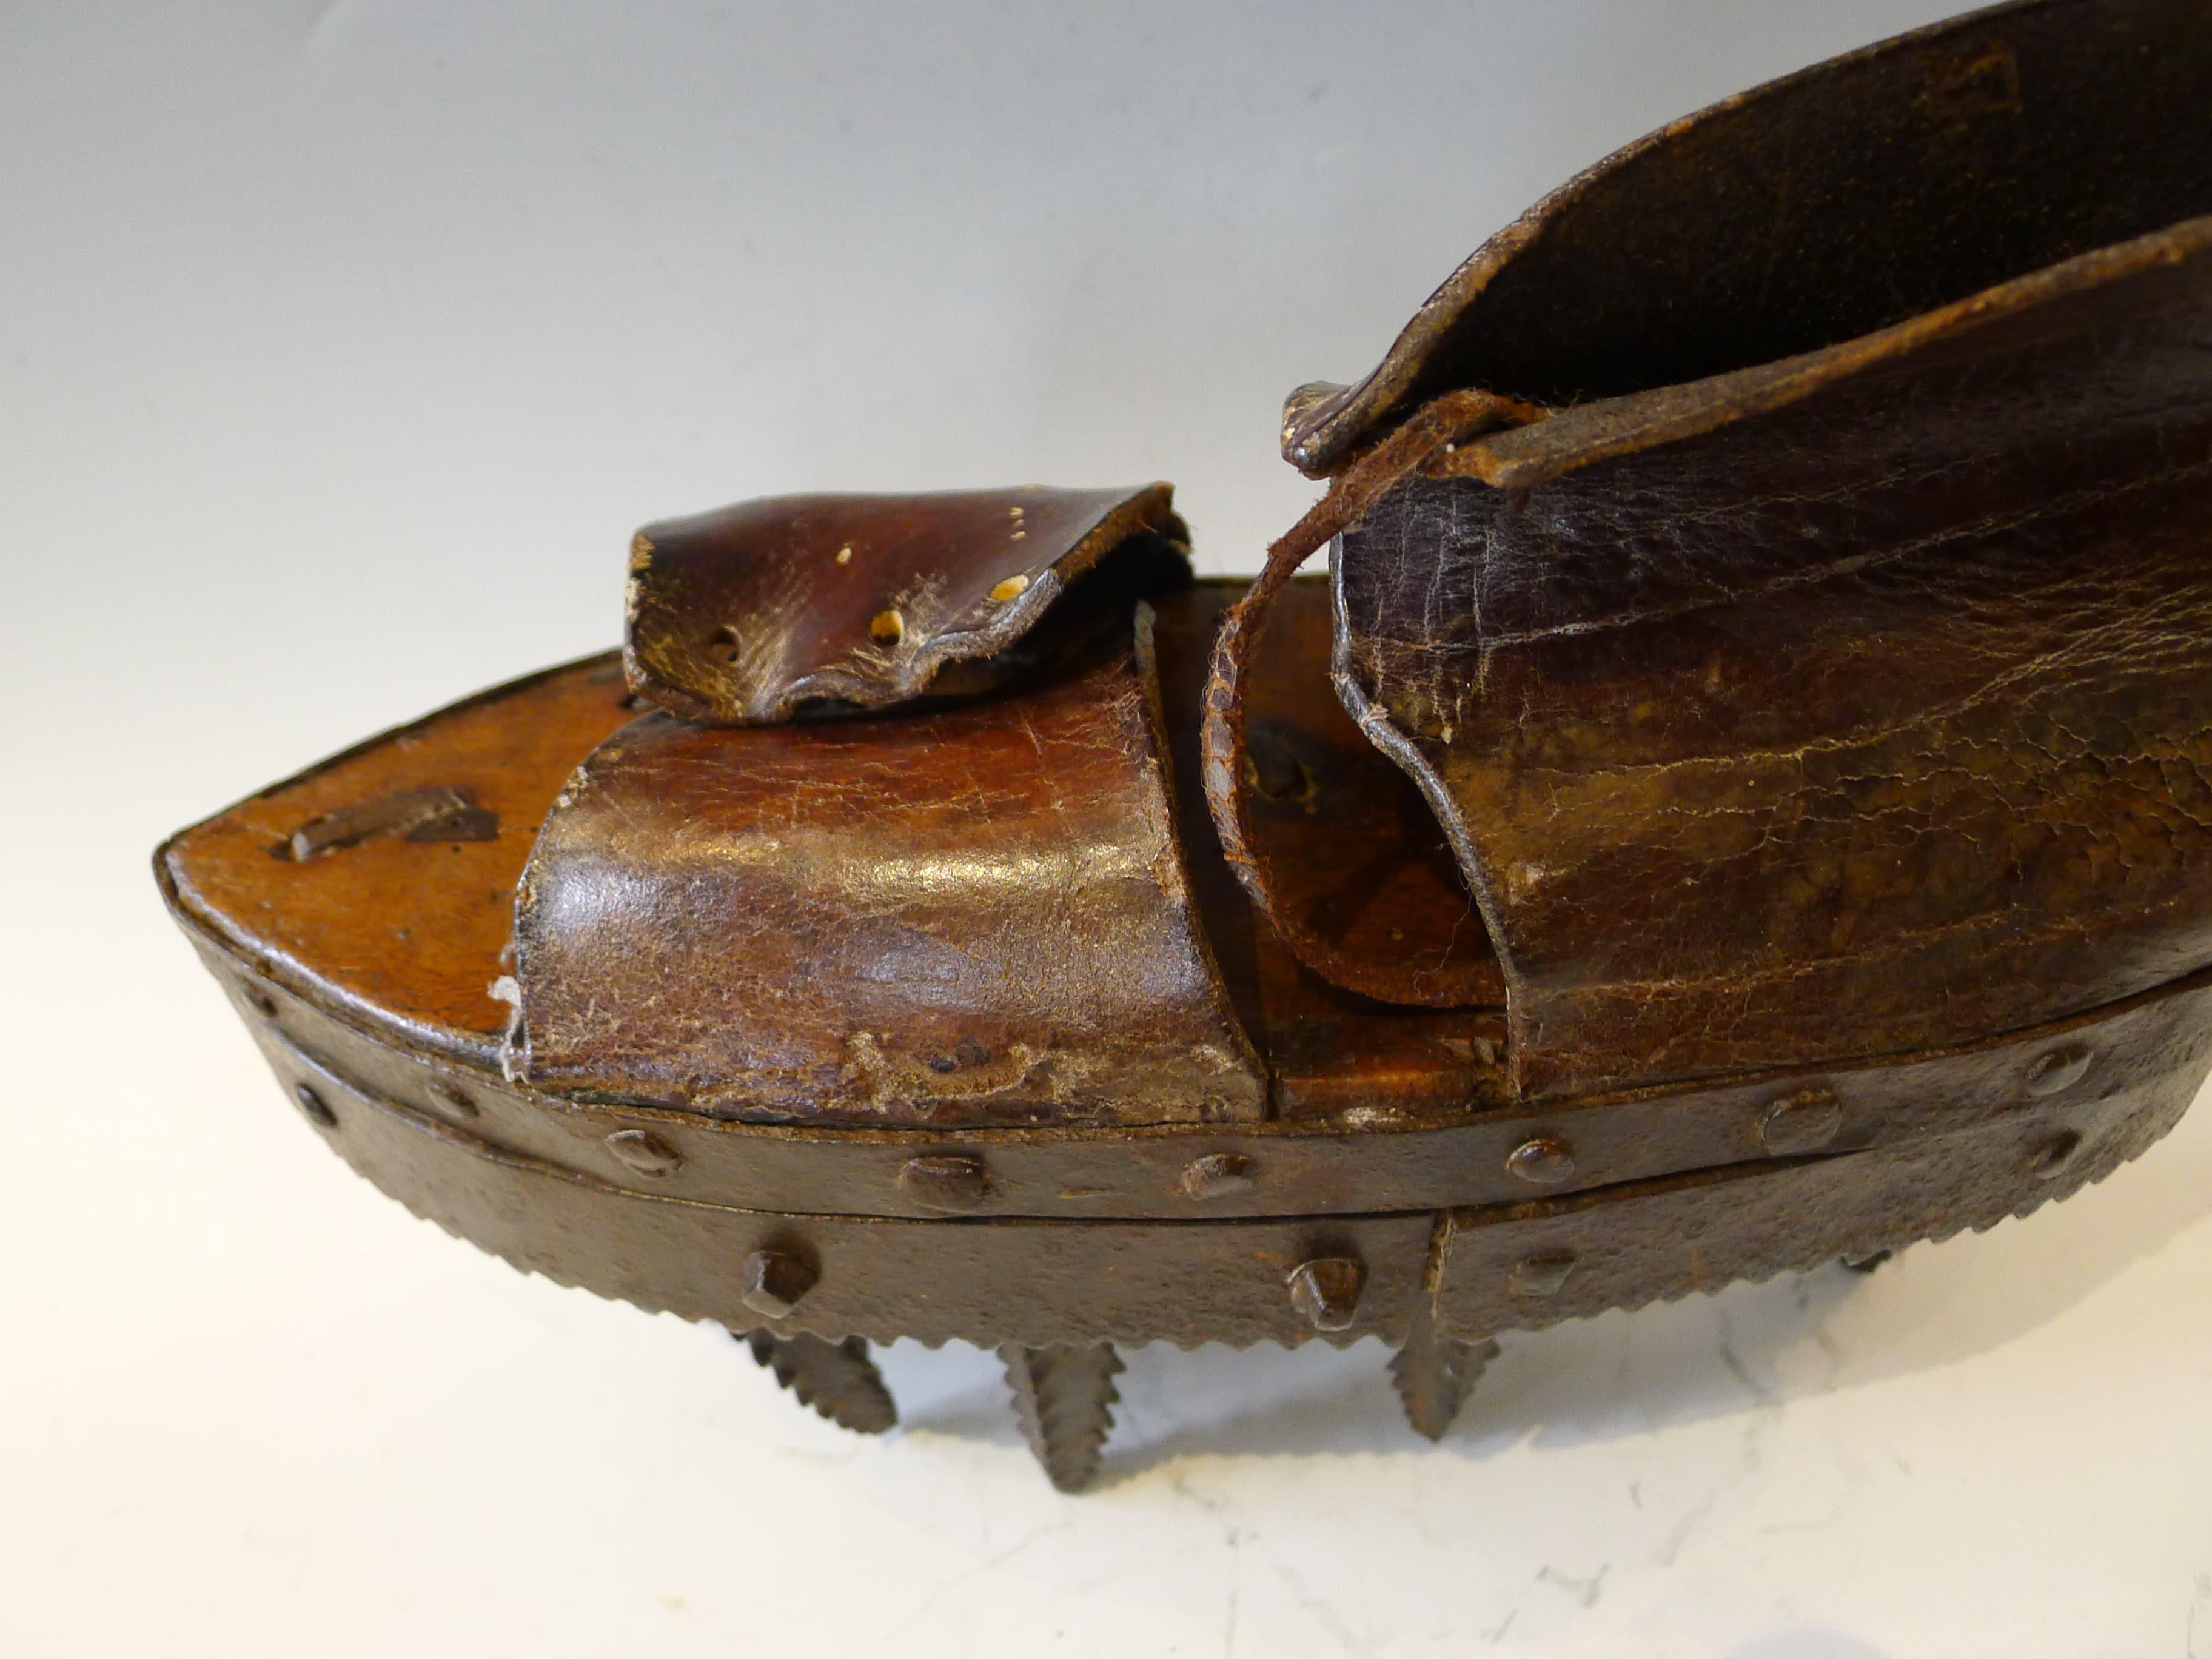 Fired Incredible Shoes to Break Sweet Chestnuts, 19th Century